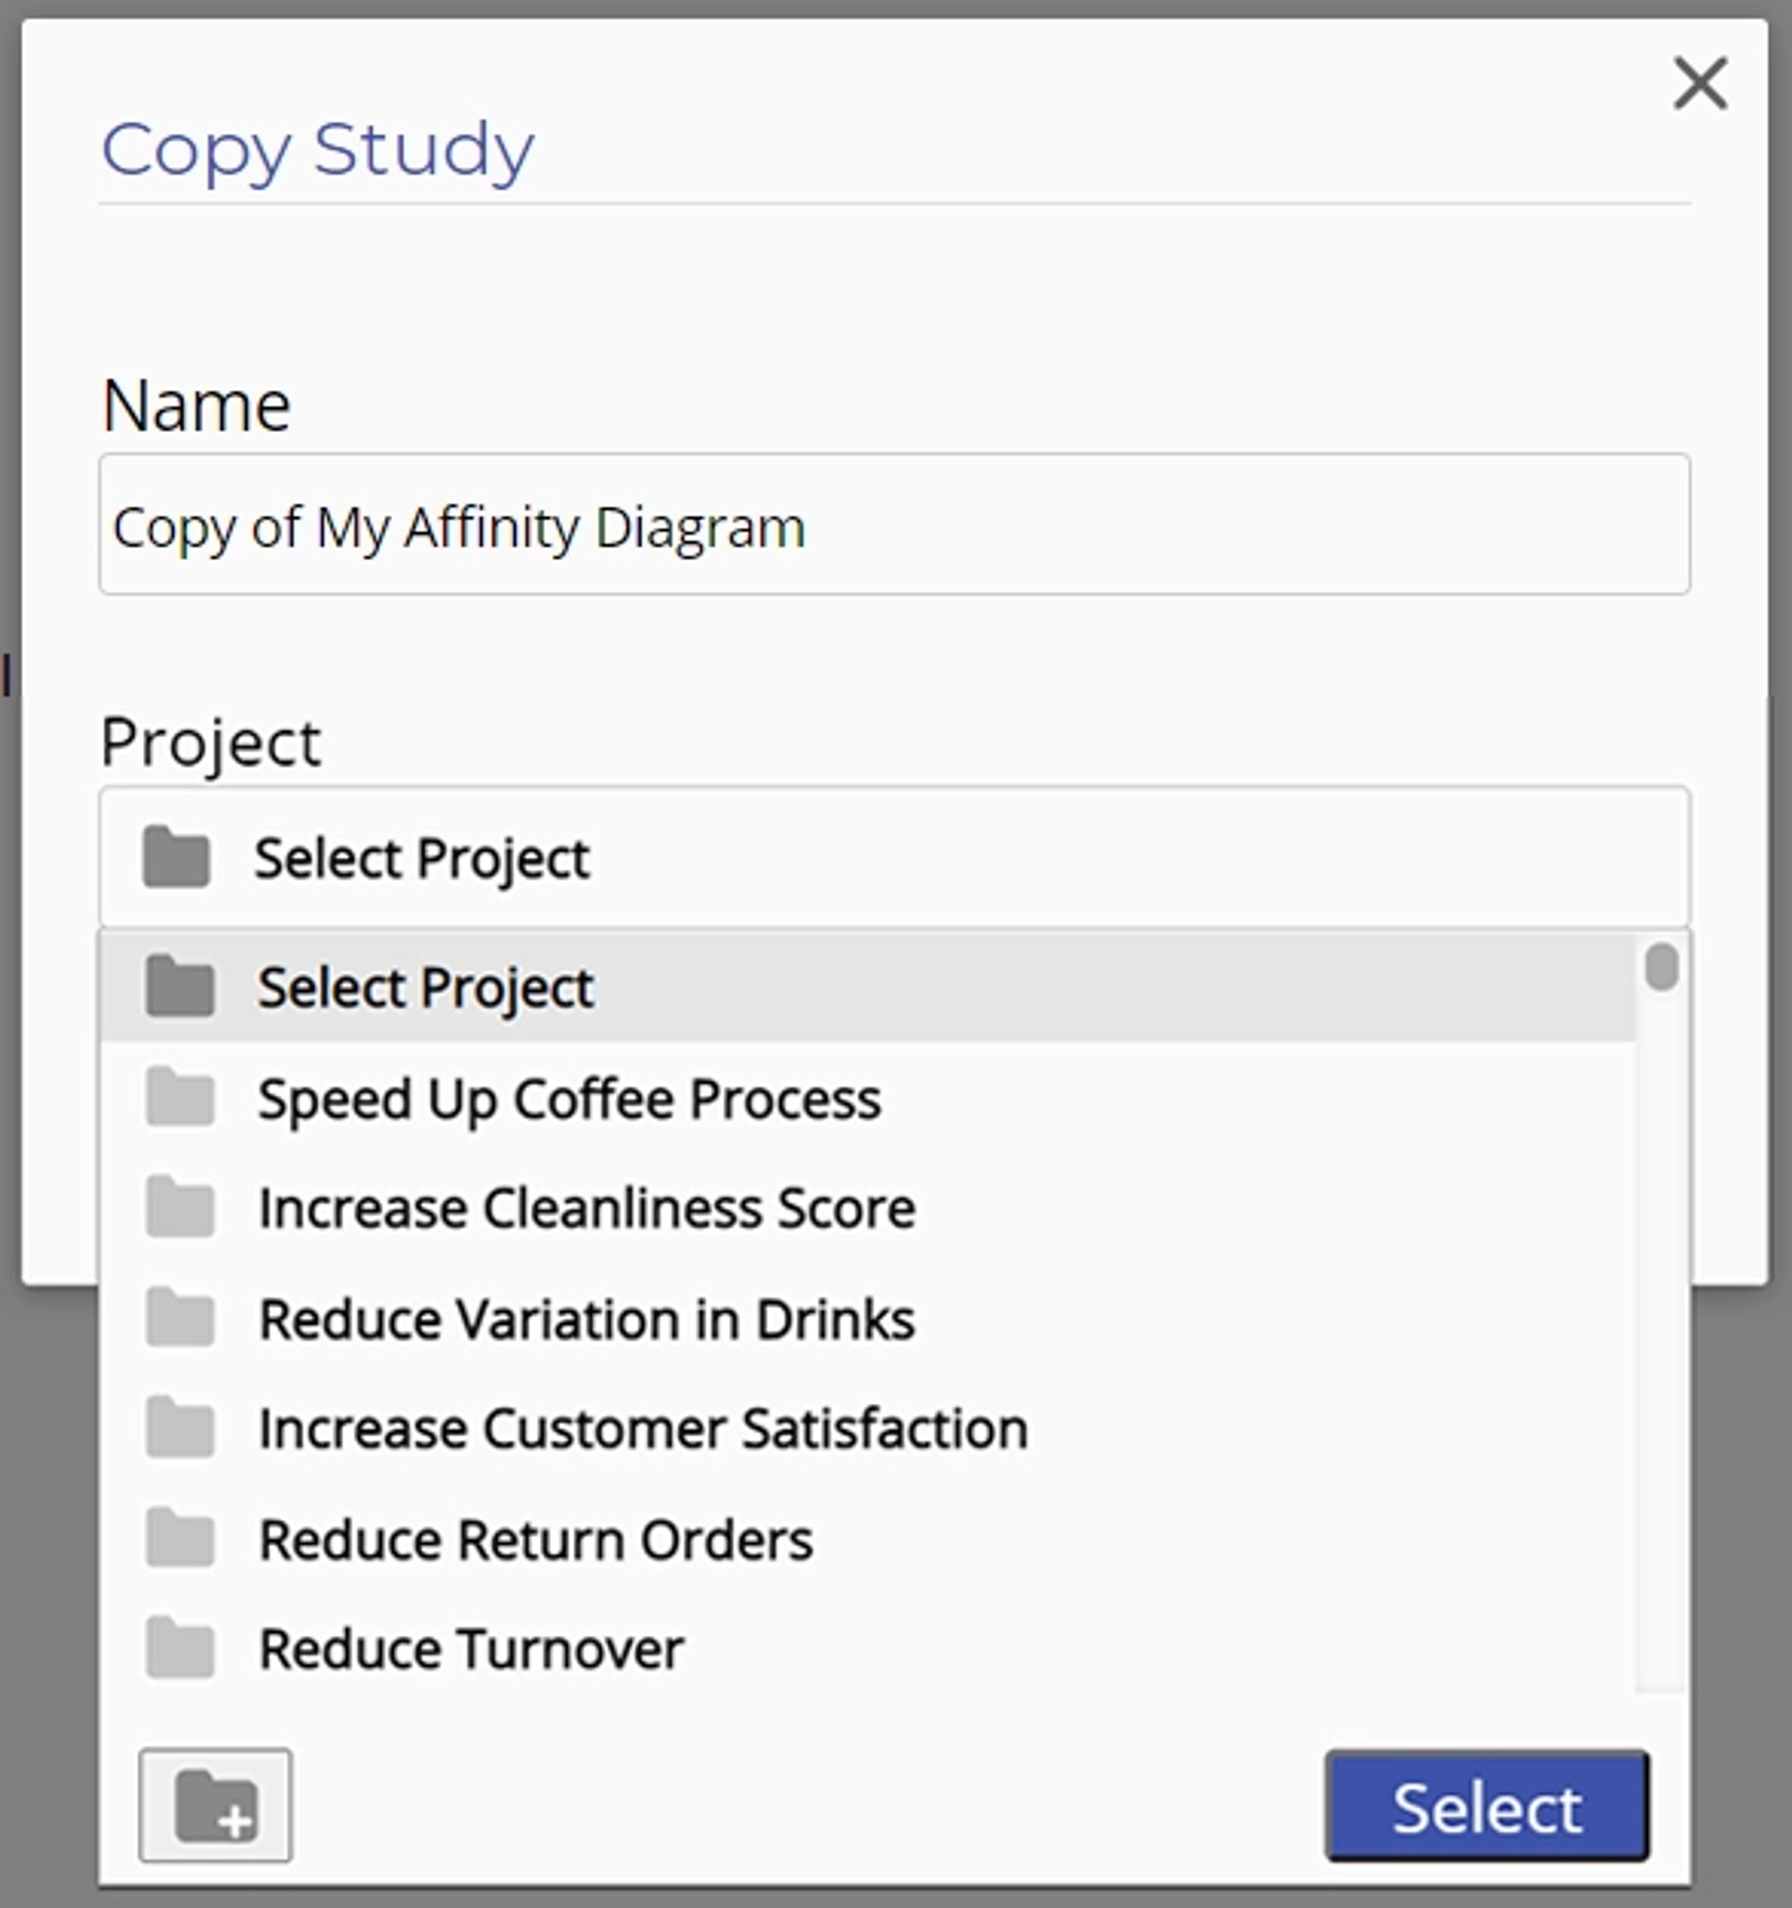 Choose which study to copy from dropdown.